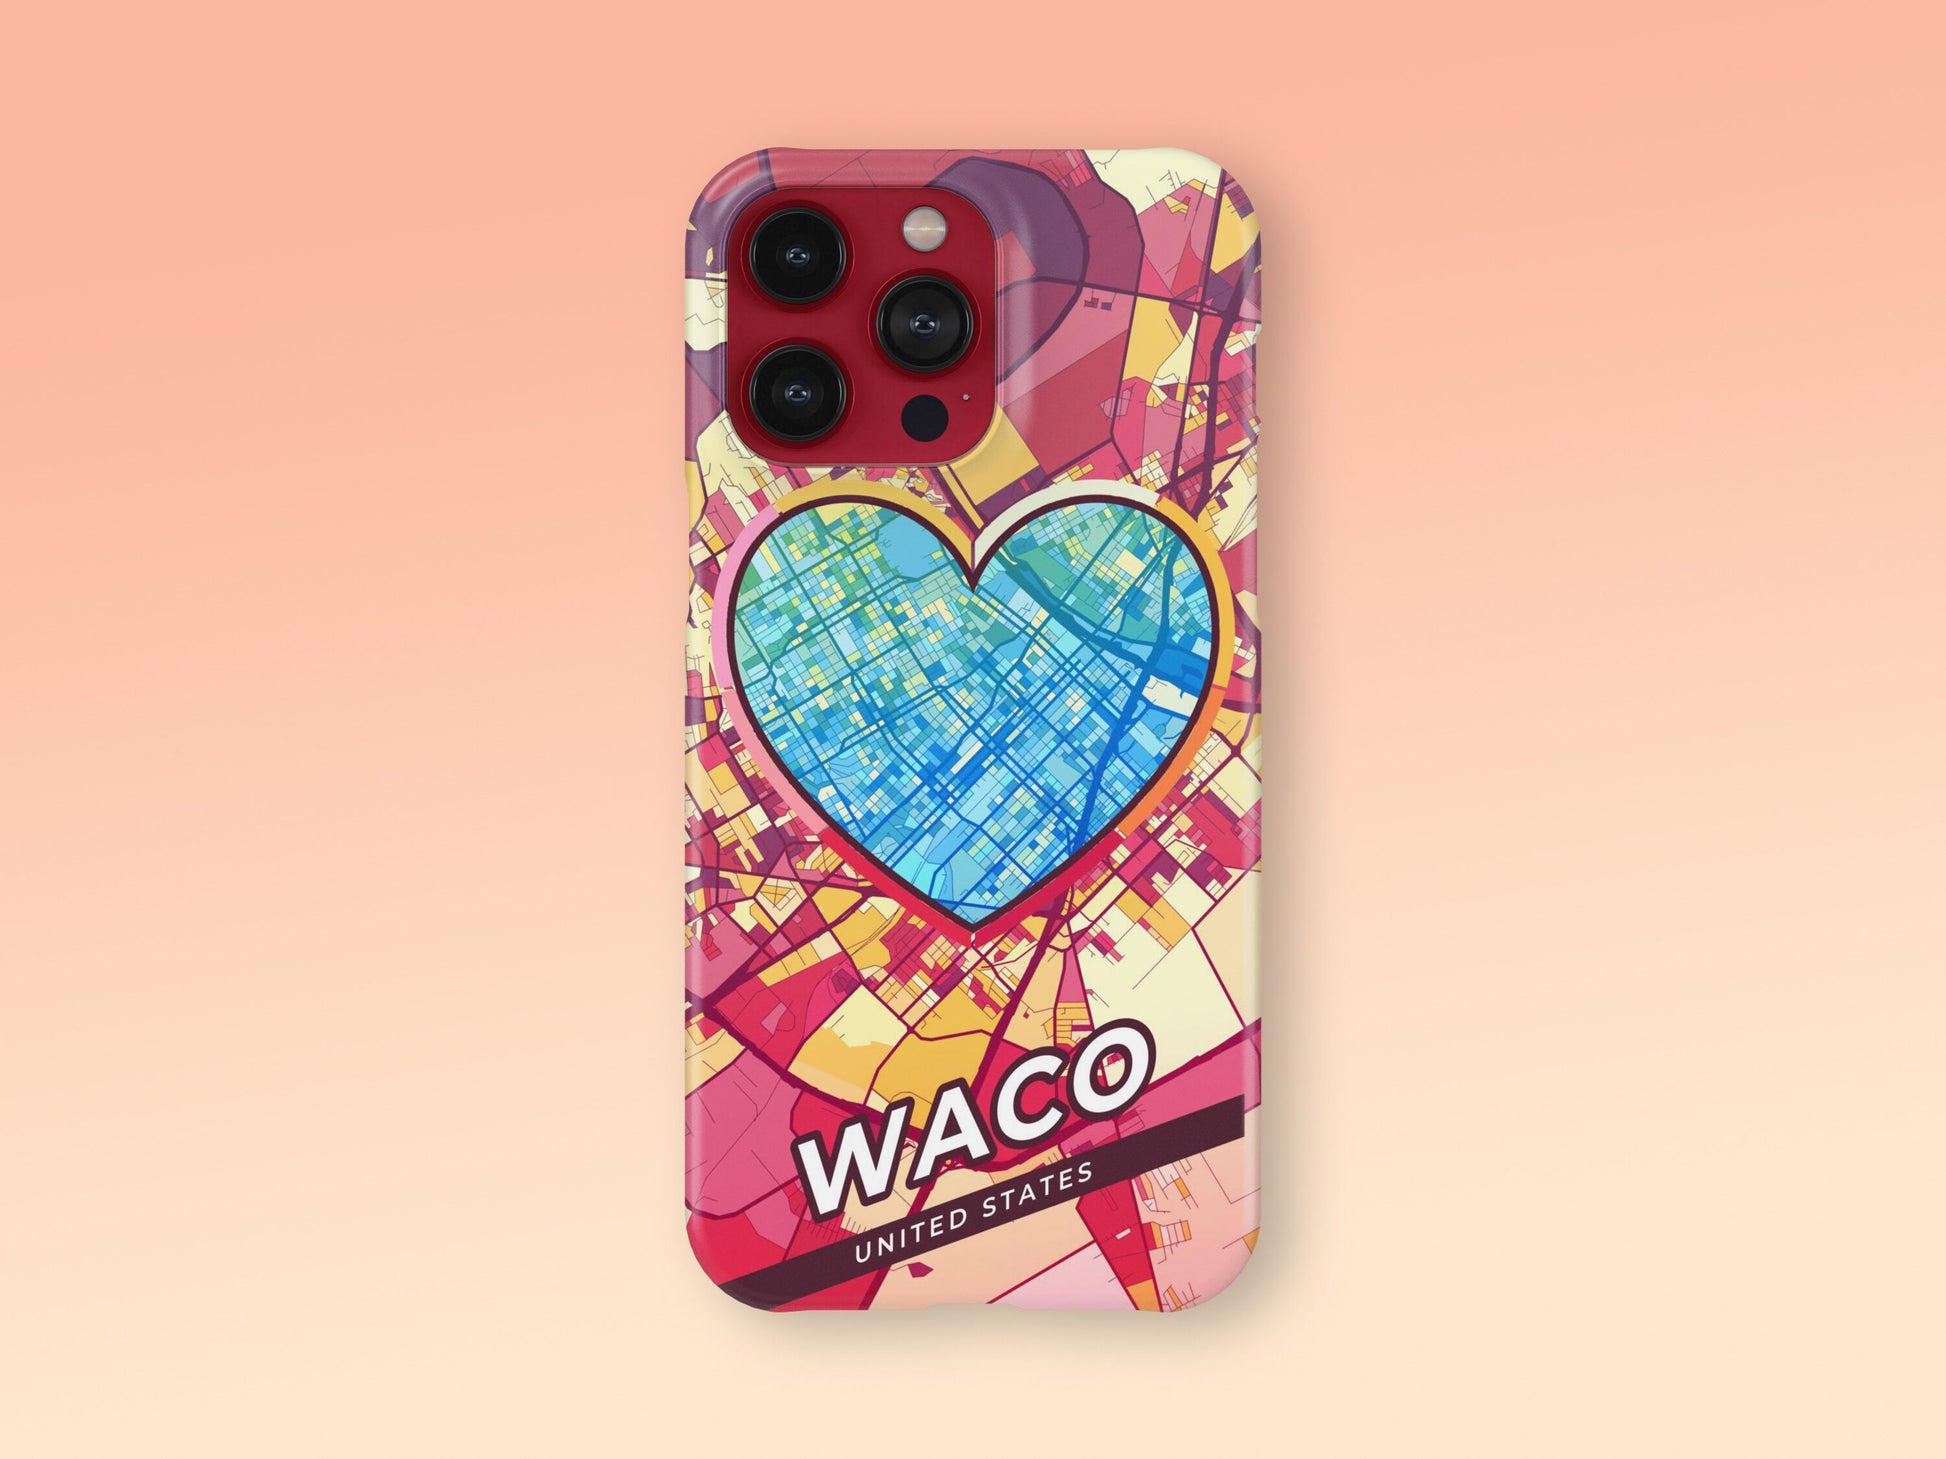 Waco Texas slim phone case with colorful icon 2